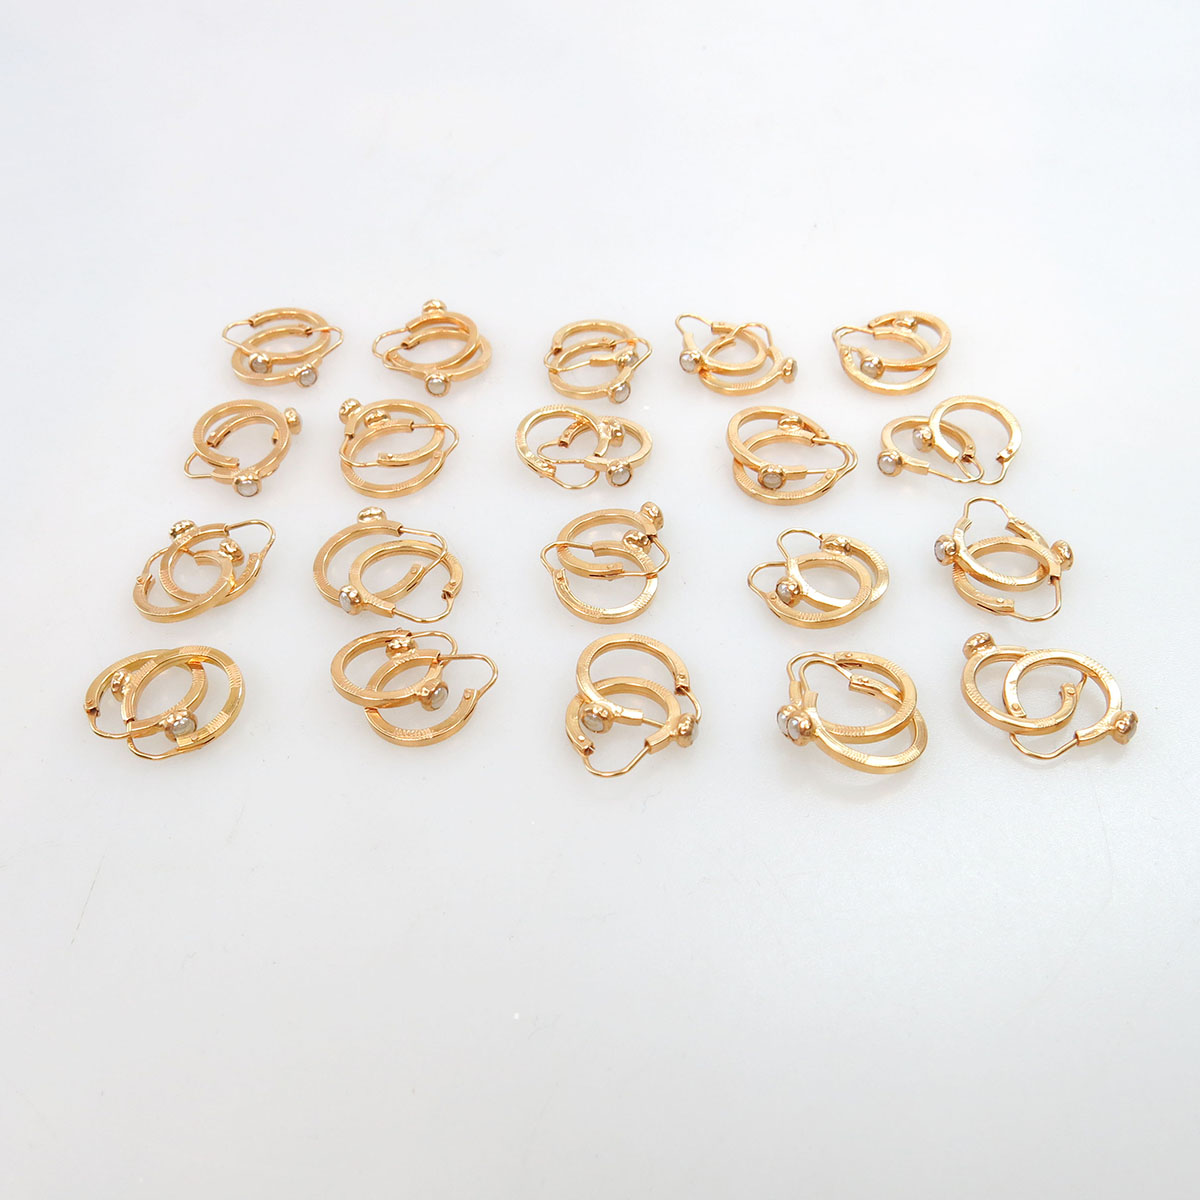 20 Pairs Of Small 18k Yellow Gold Hoop Earrings